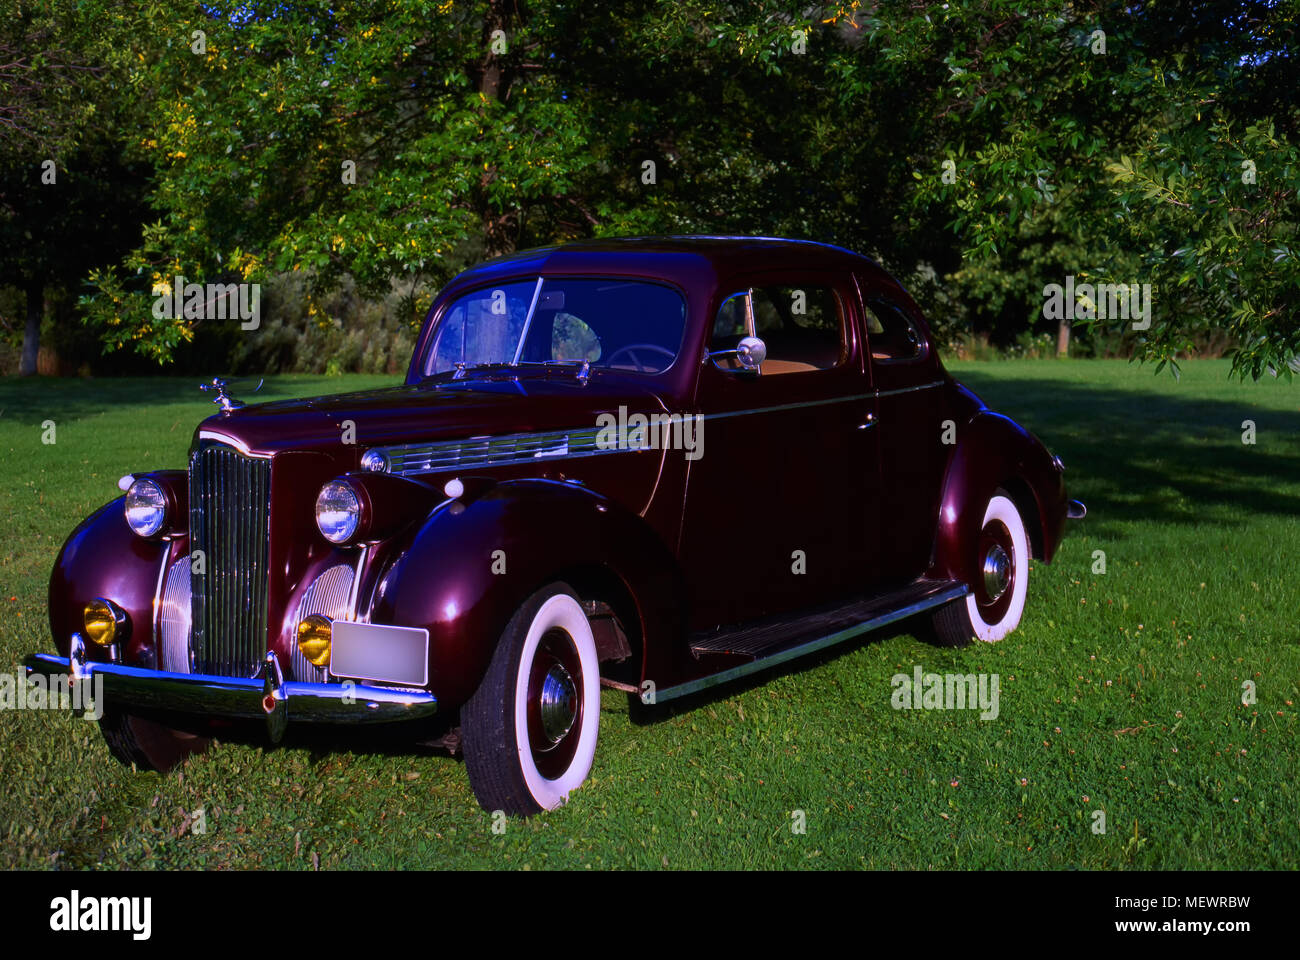 1940 Packard 110 Coupe on grass Stock Photo